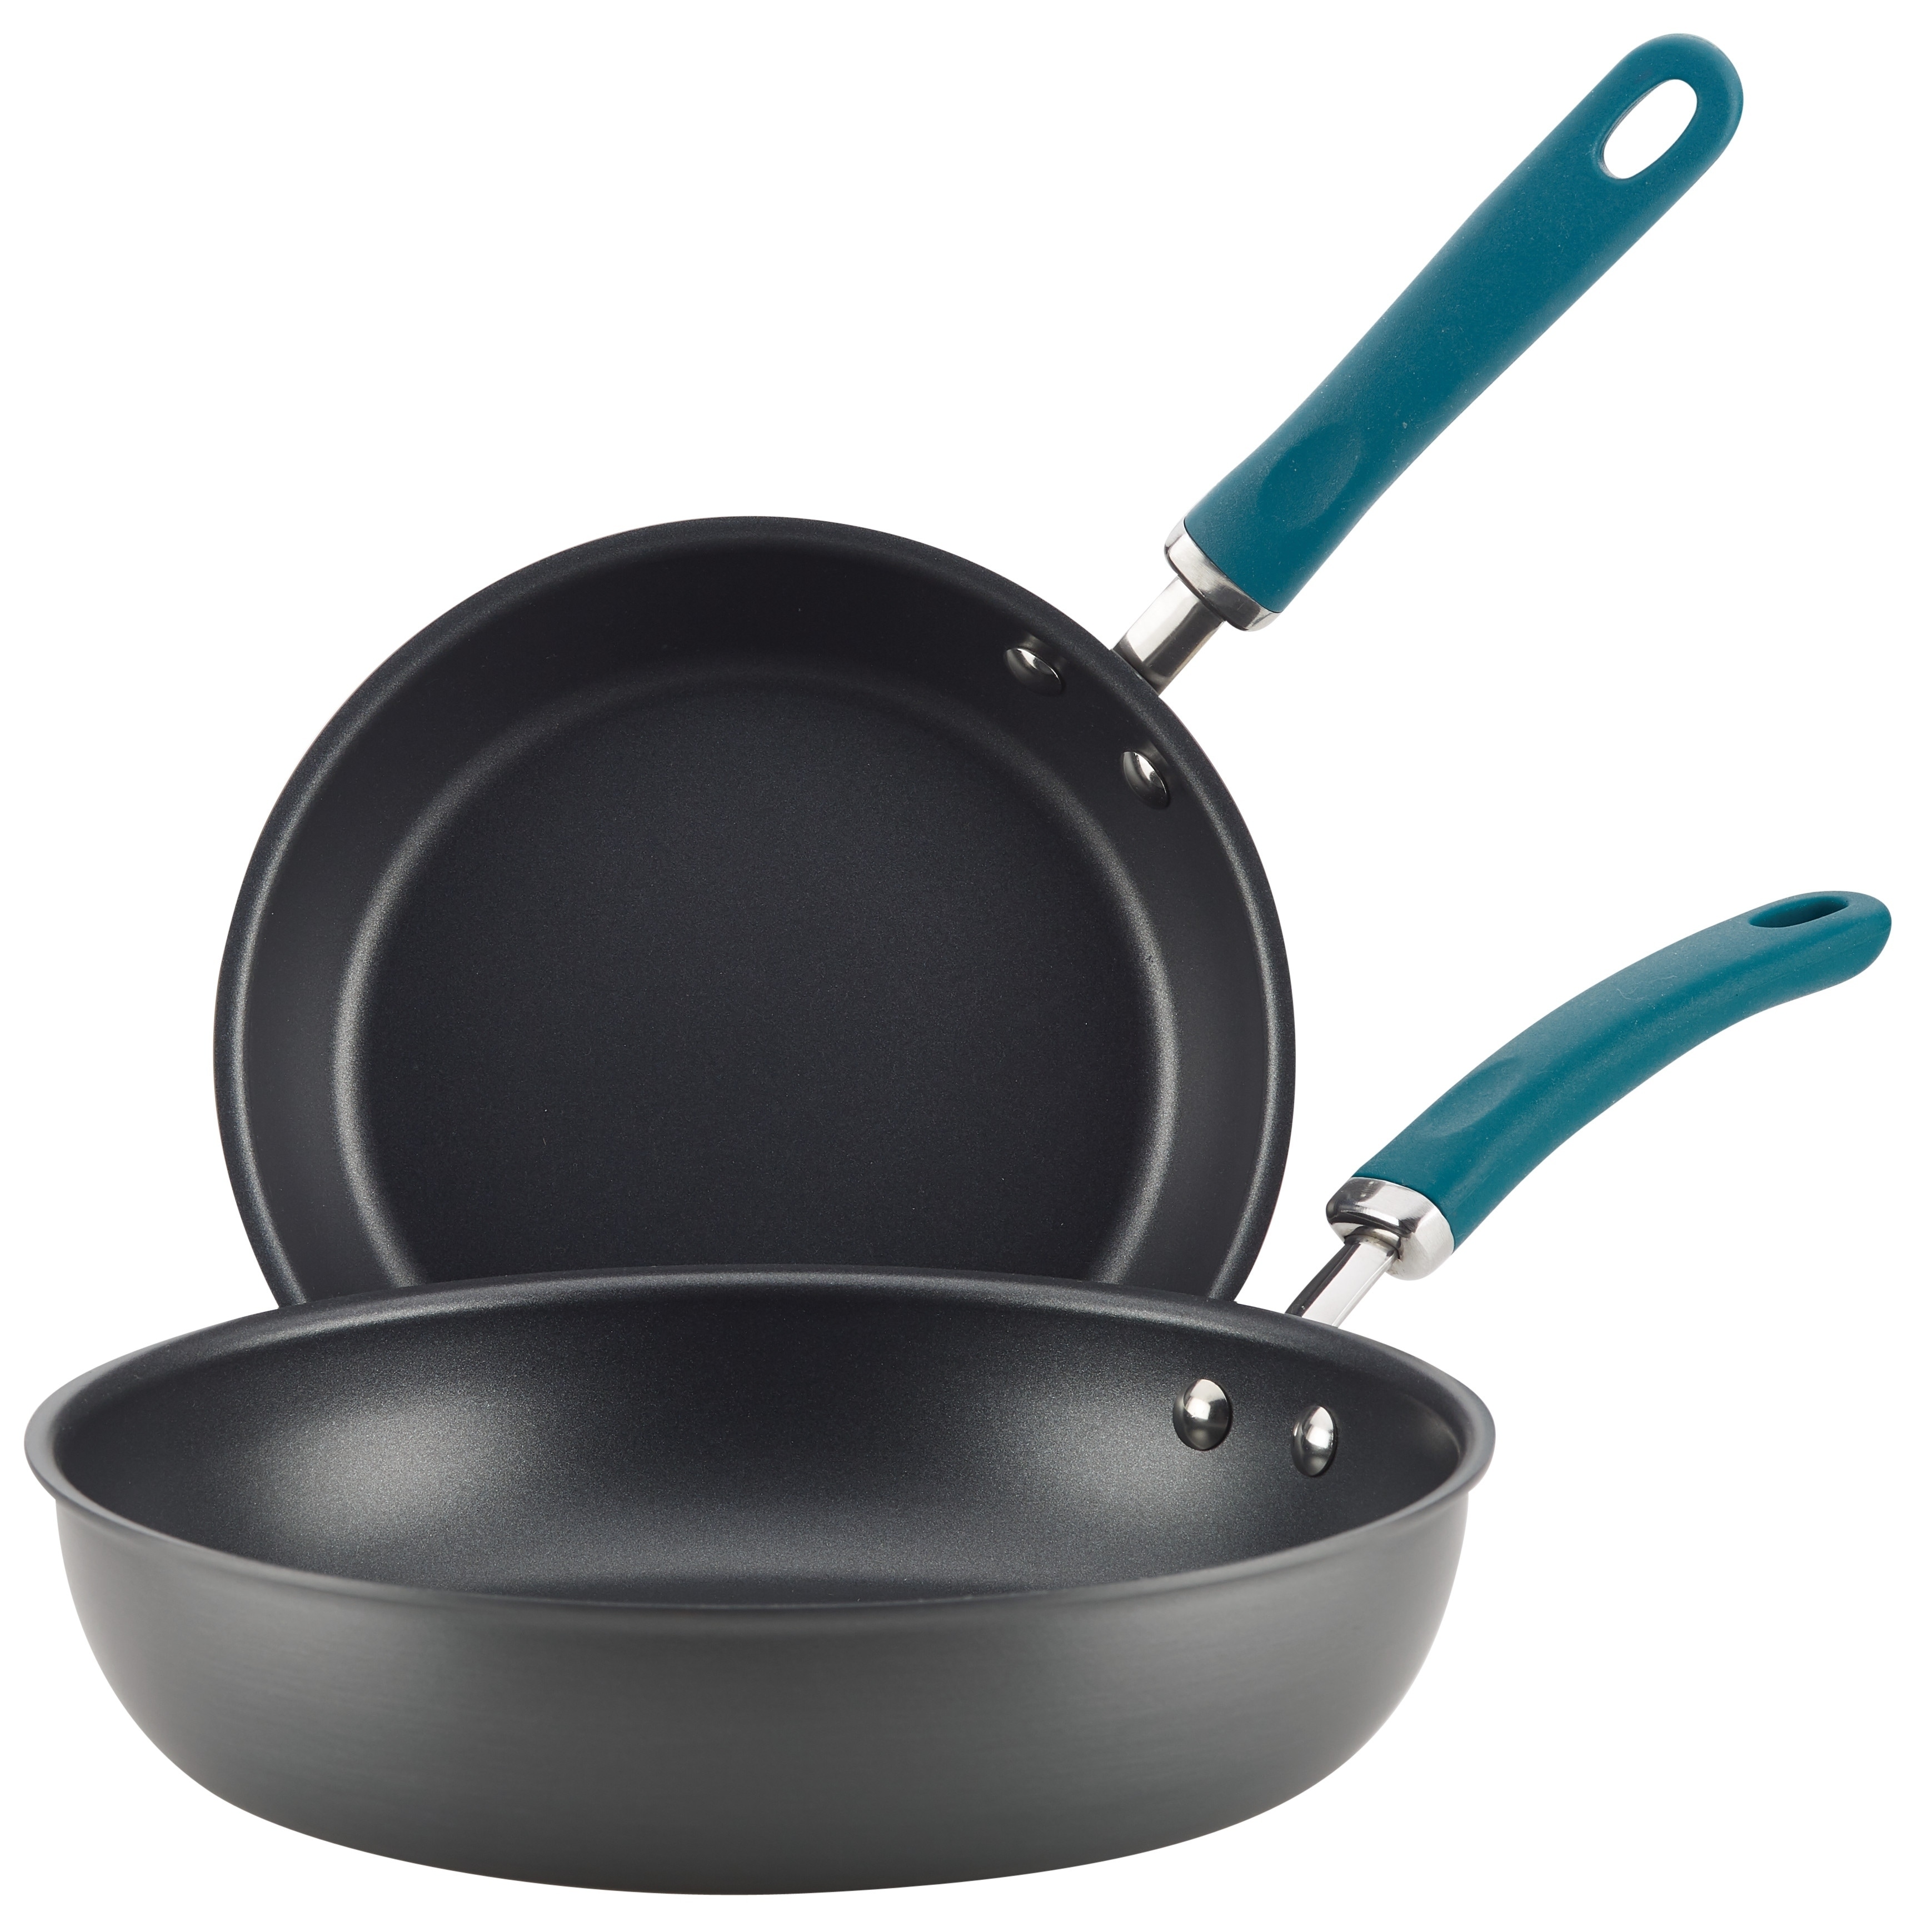 Rachael Ray Create Delicious Hard-Anodized Nonstick Deep Skillets Bed  Bath  Beyond 26517521